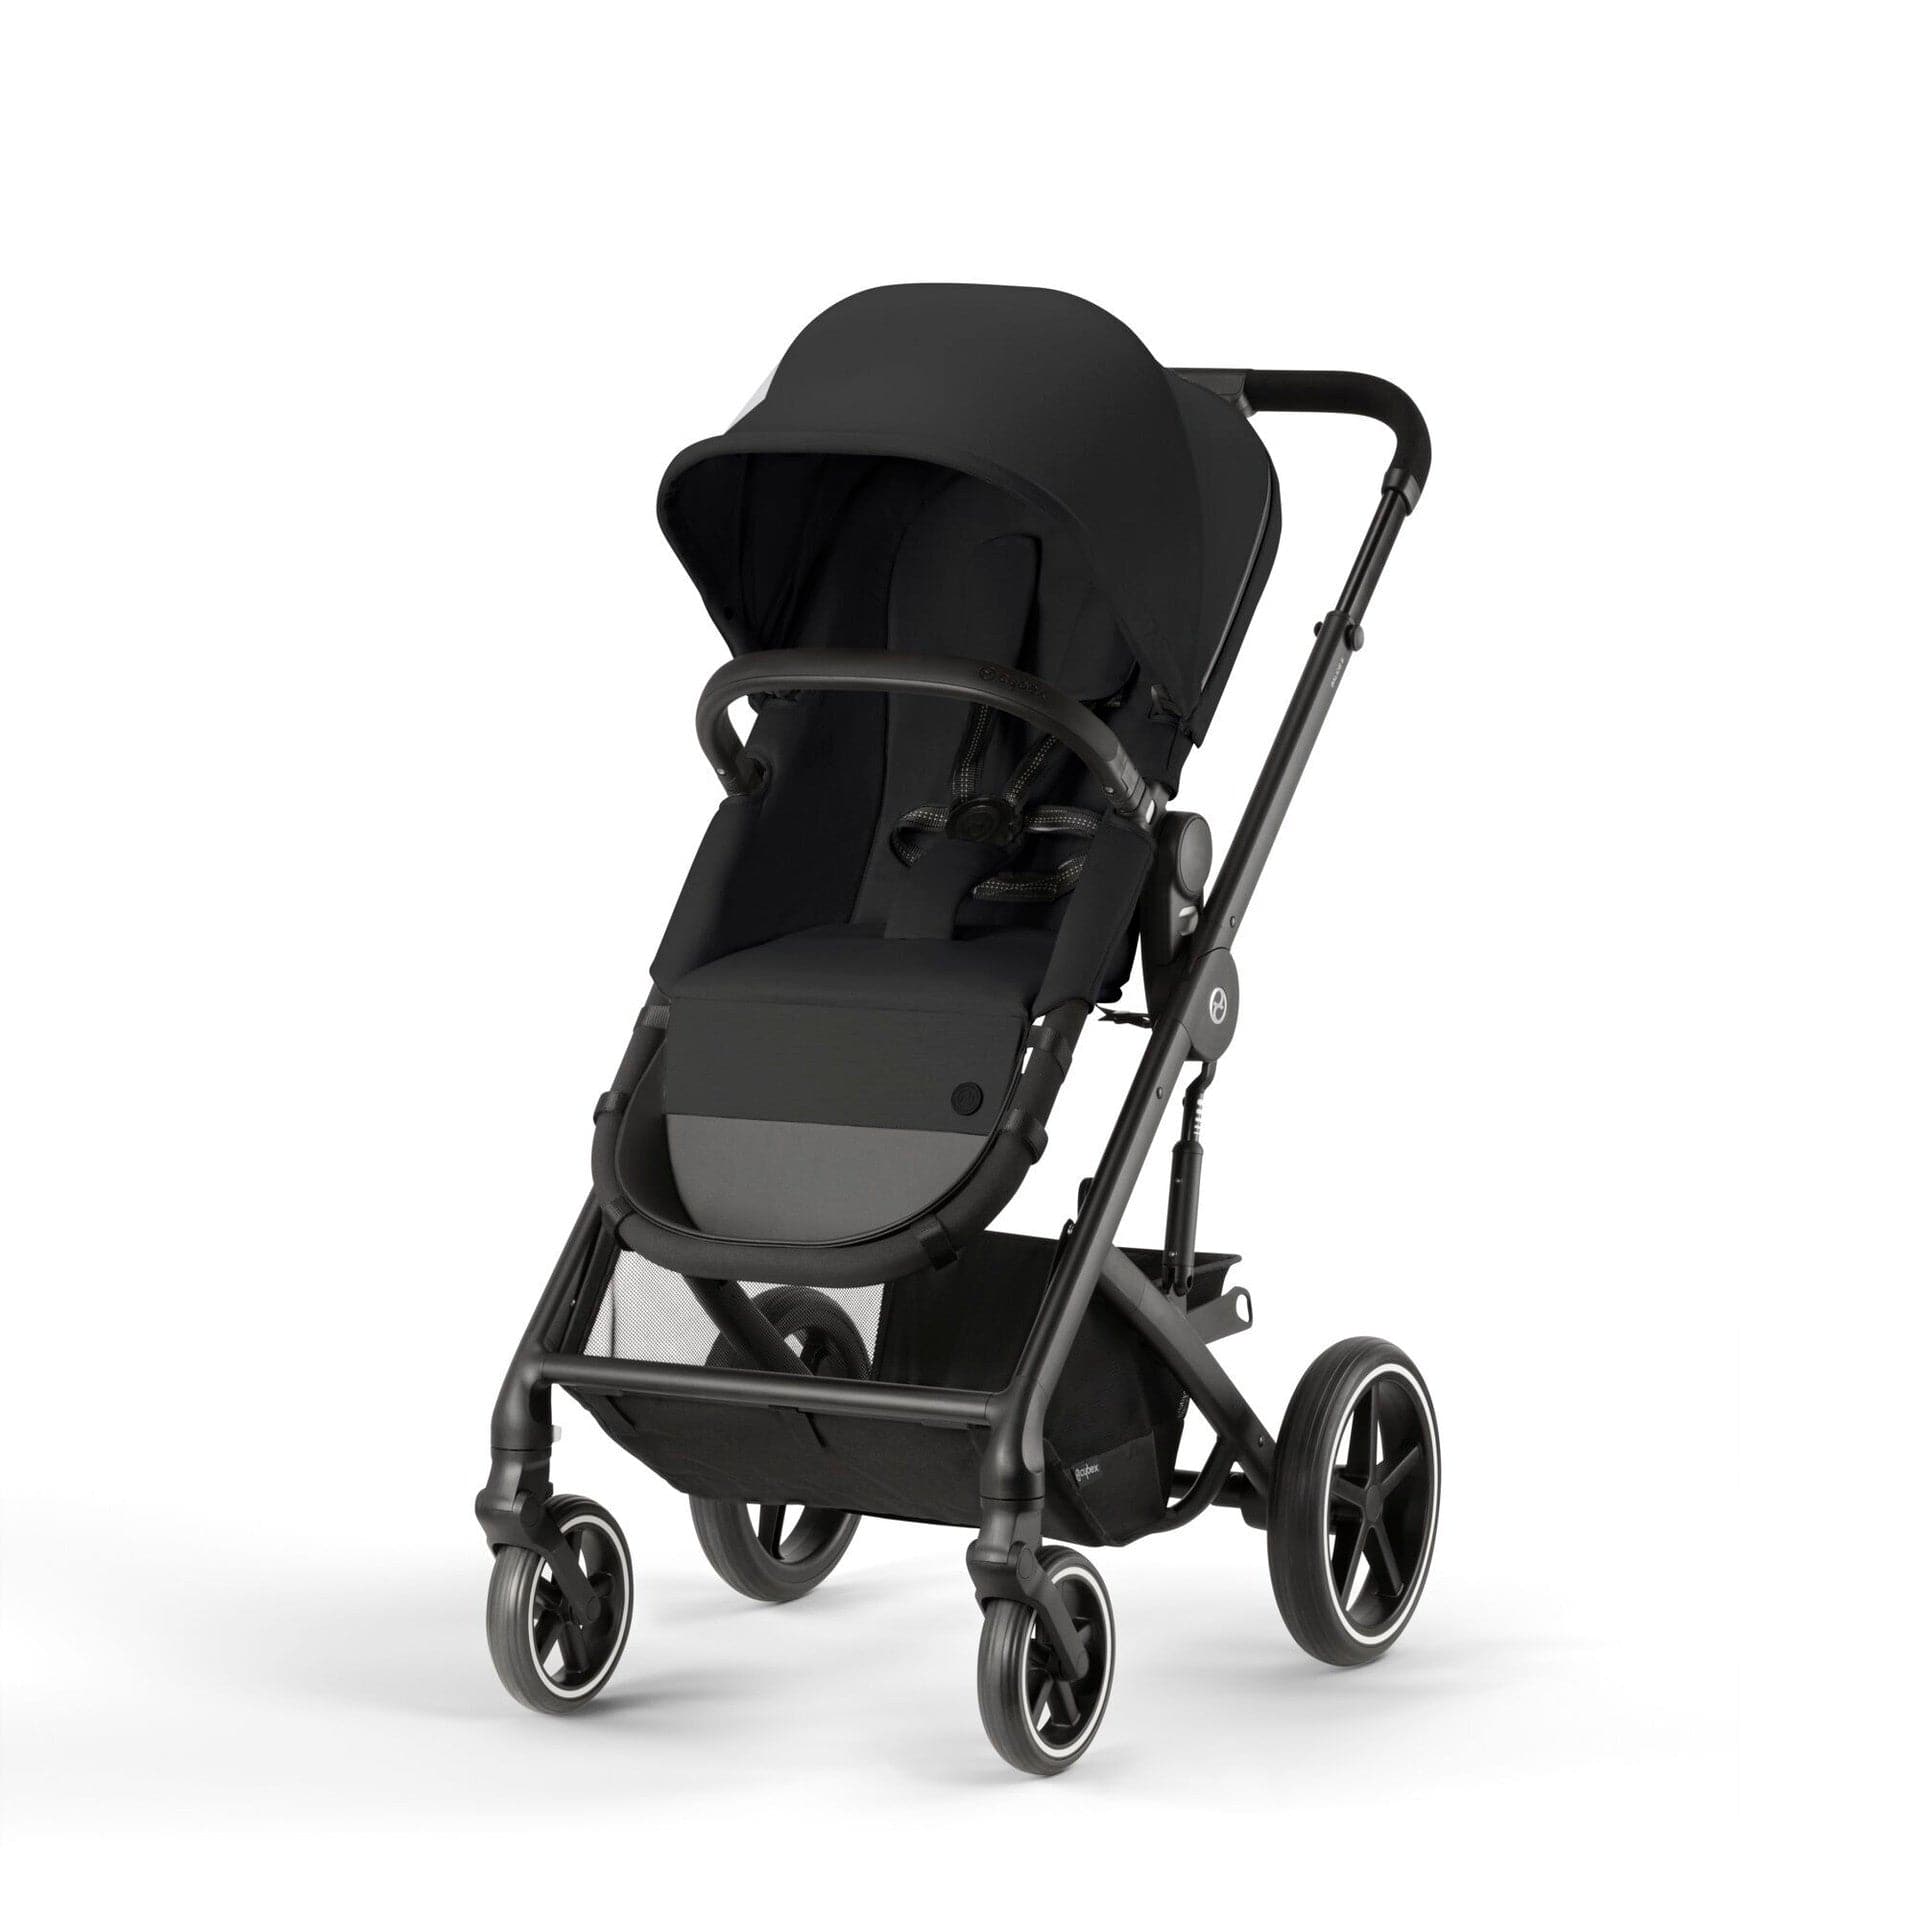 Cybex Balios S 2-in-1 Black Pushchair - Nebula Black - For Your Little One